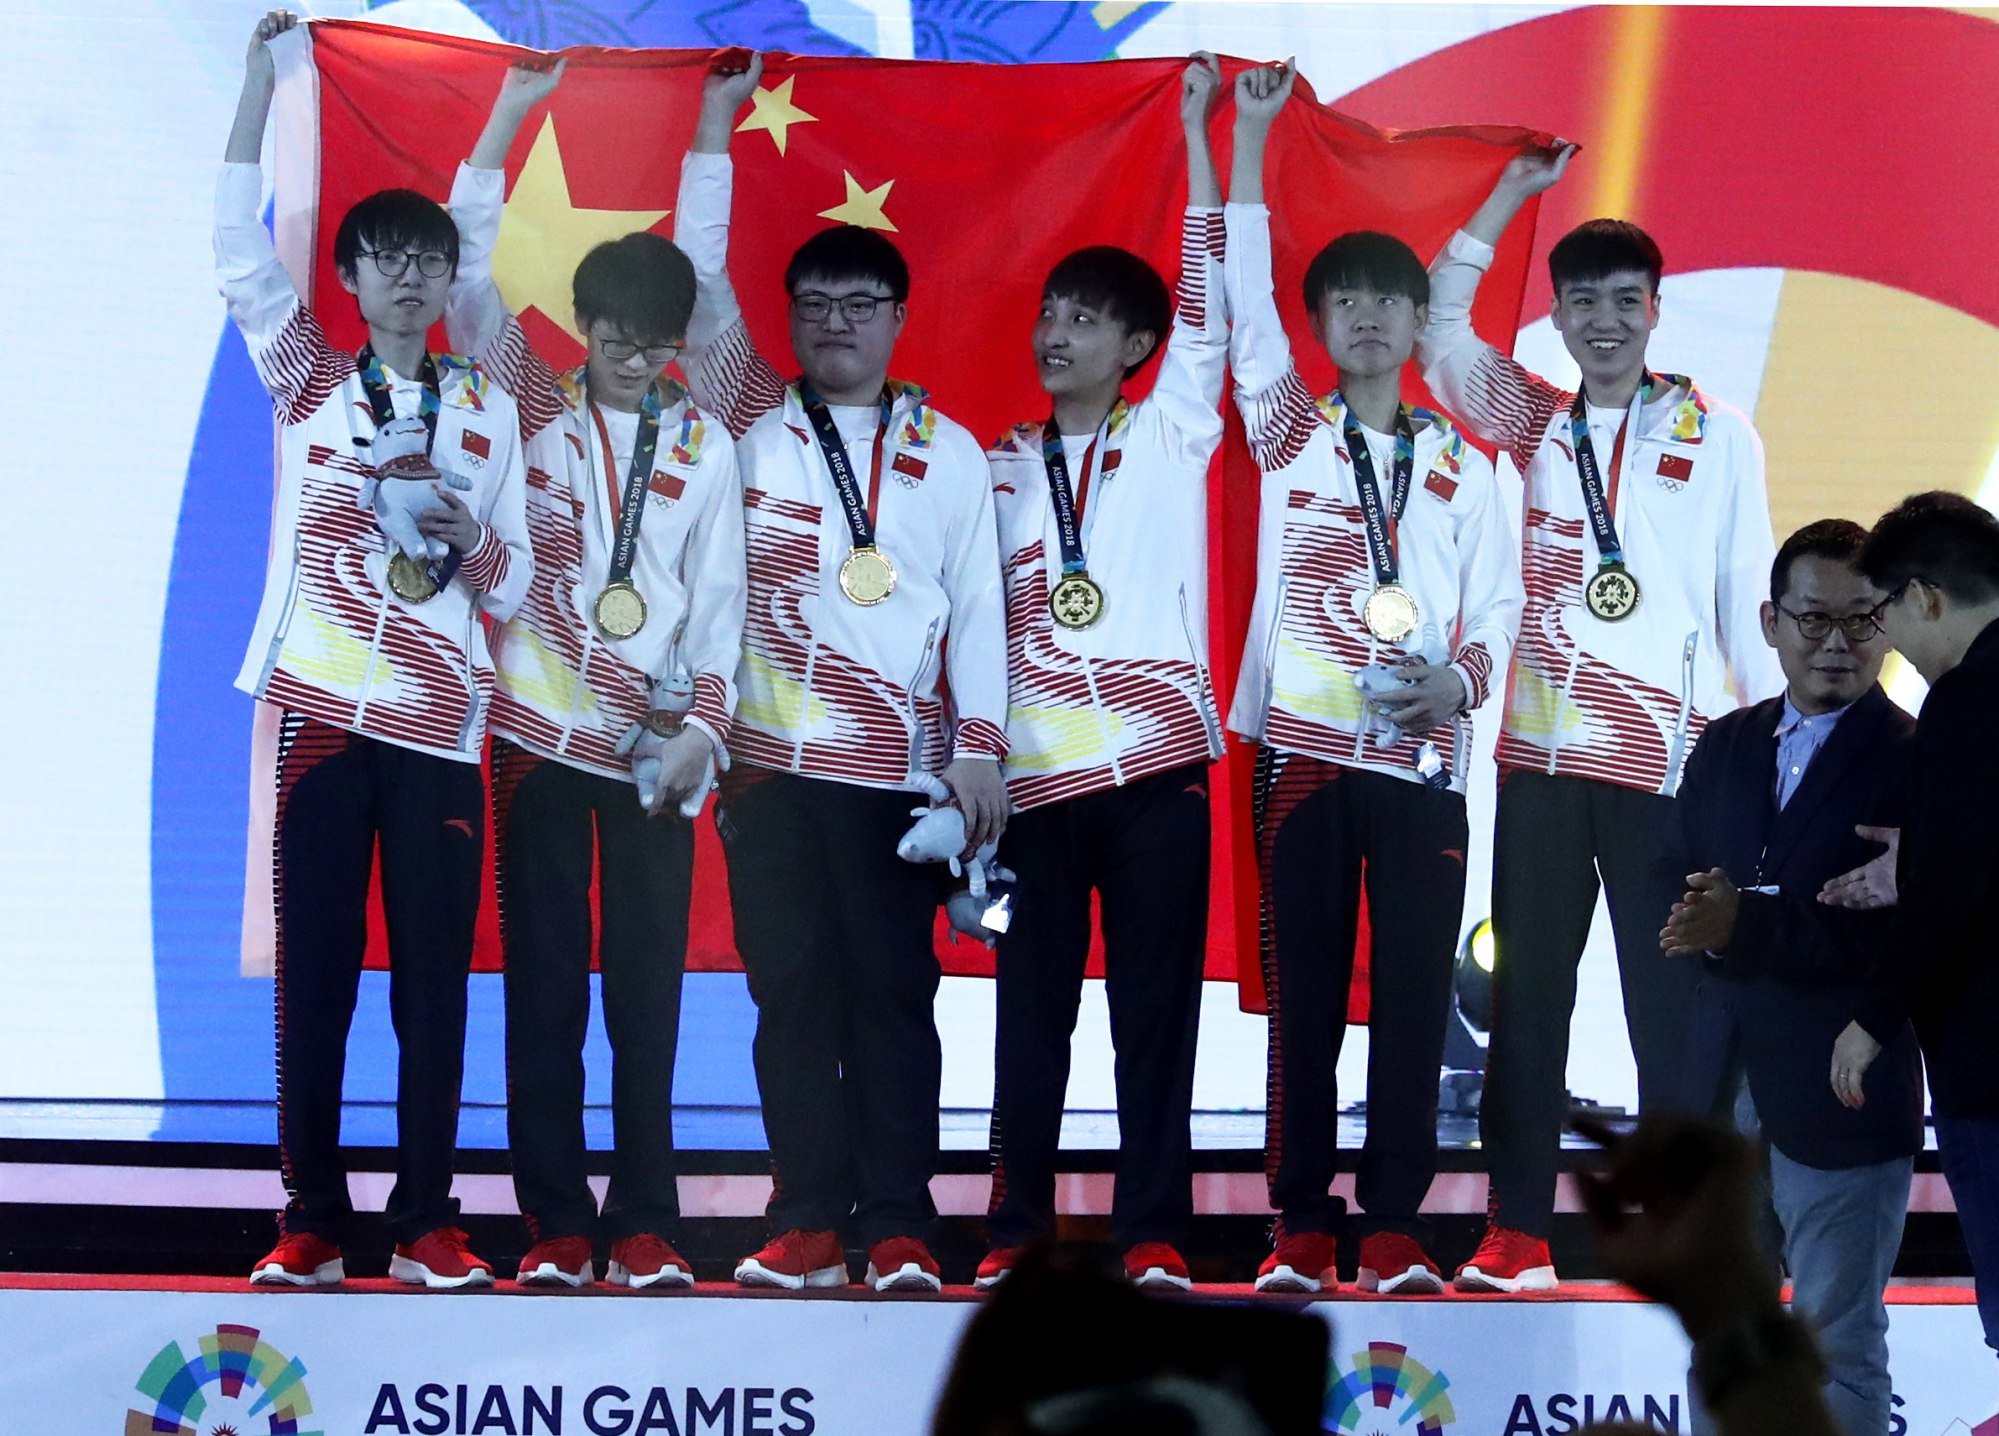 The condition: all 15 players from South Korea's national team, including  Faker, must win a gold medal 🥇 at the Asian Games. Reports of…